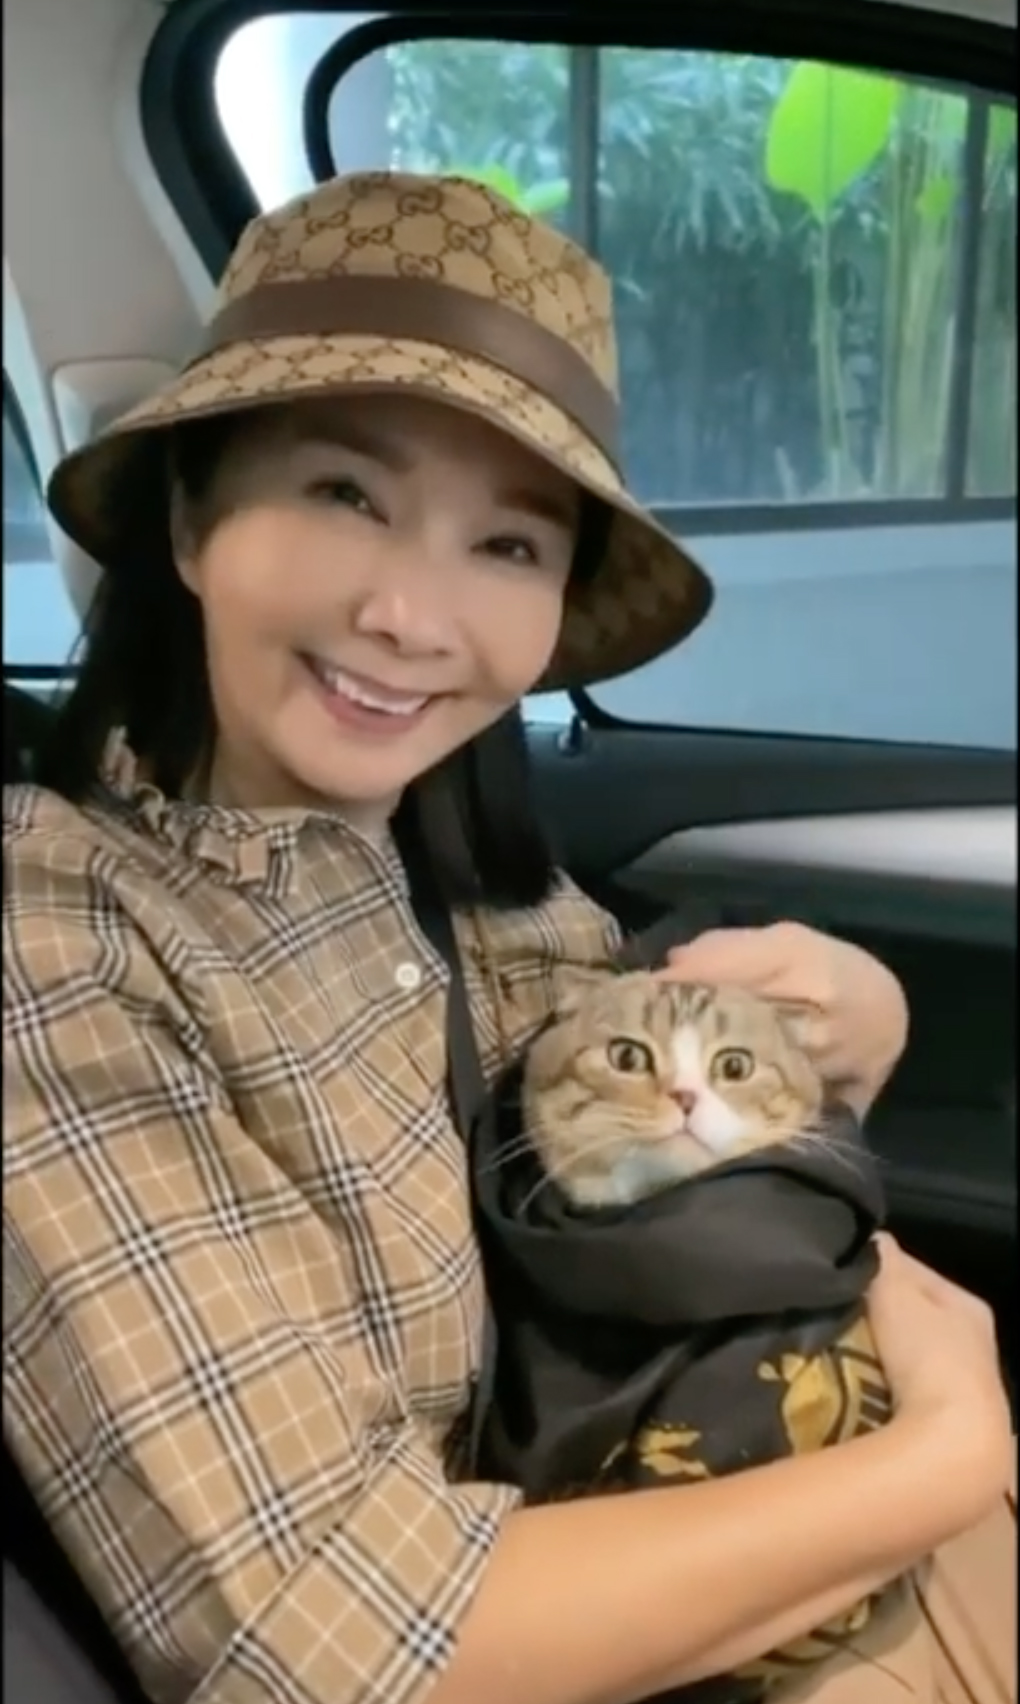 Chen Xiuhuan adopted a special needs cat